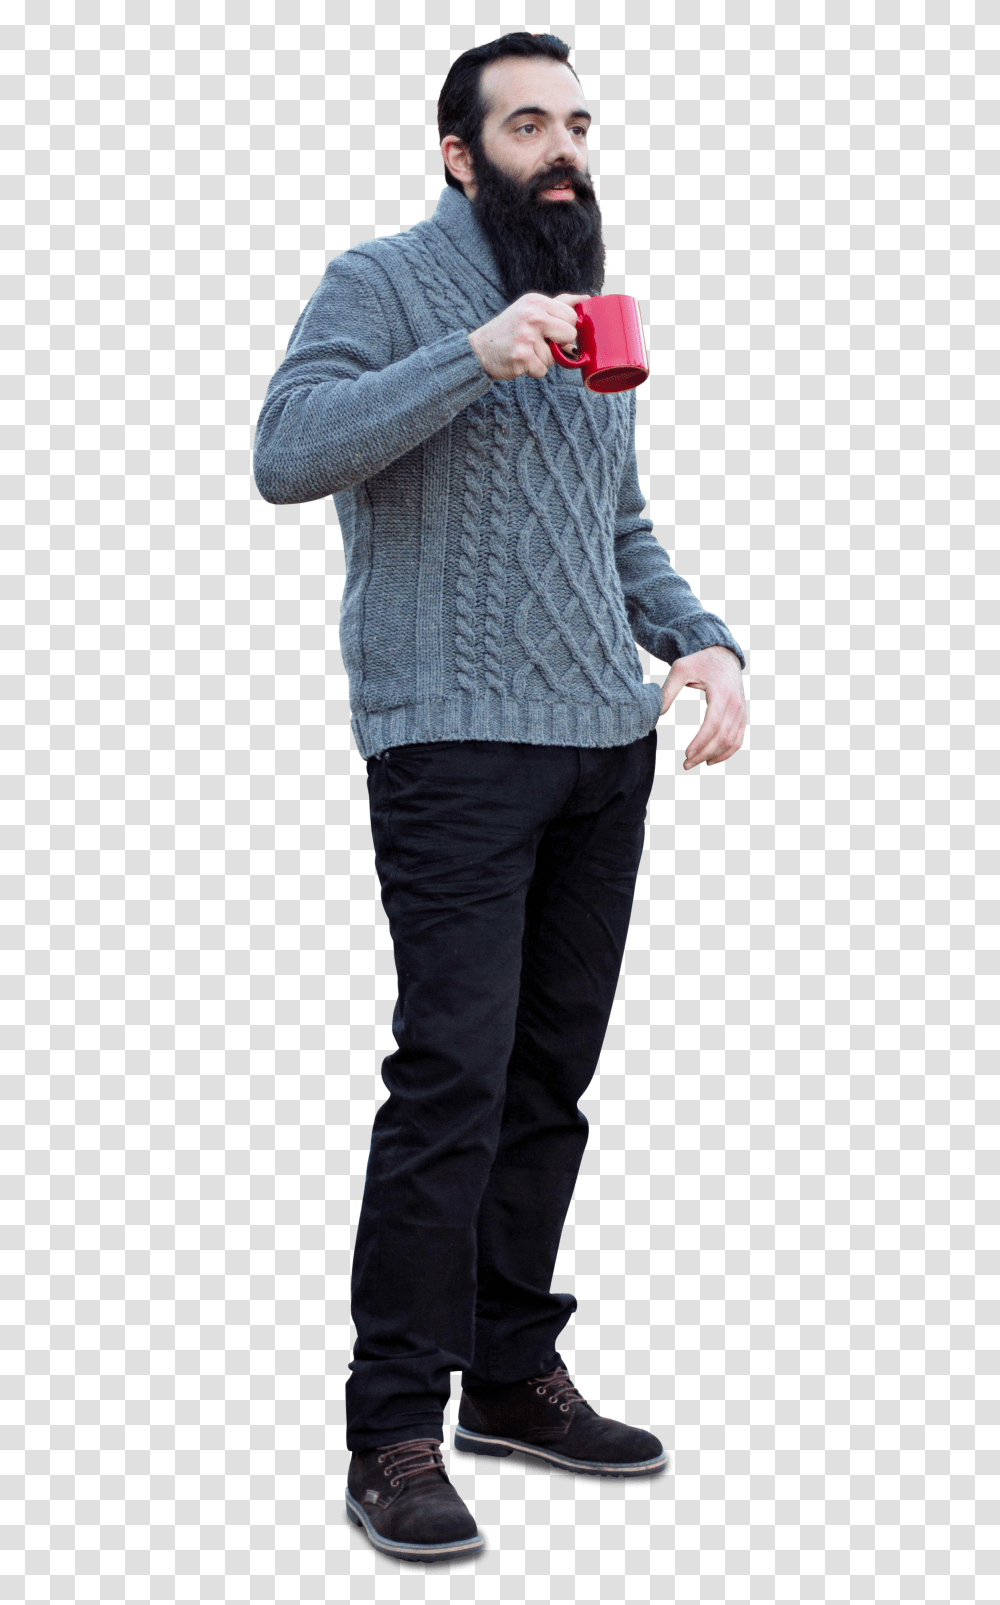 Drinking Coffee Cut Out People Drinking, Apparel, Pants, Jeans Transparent Png